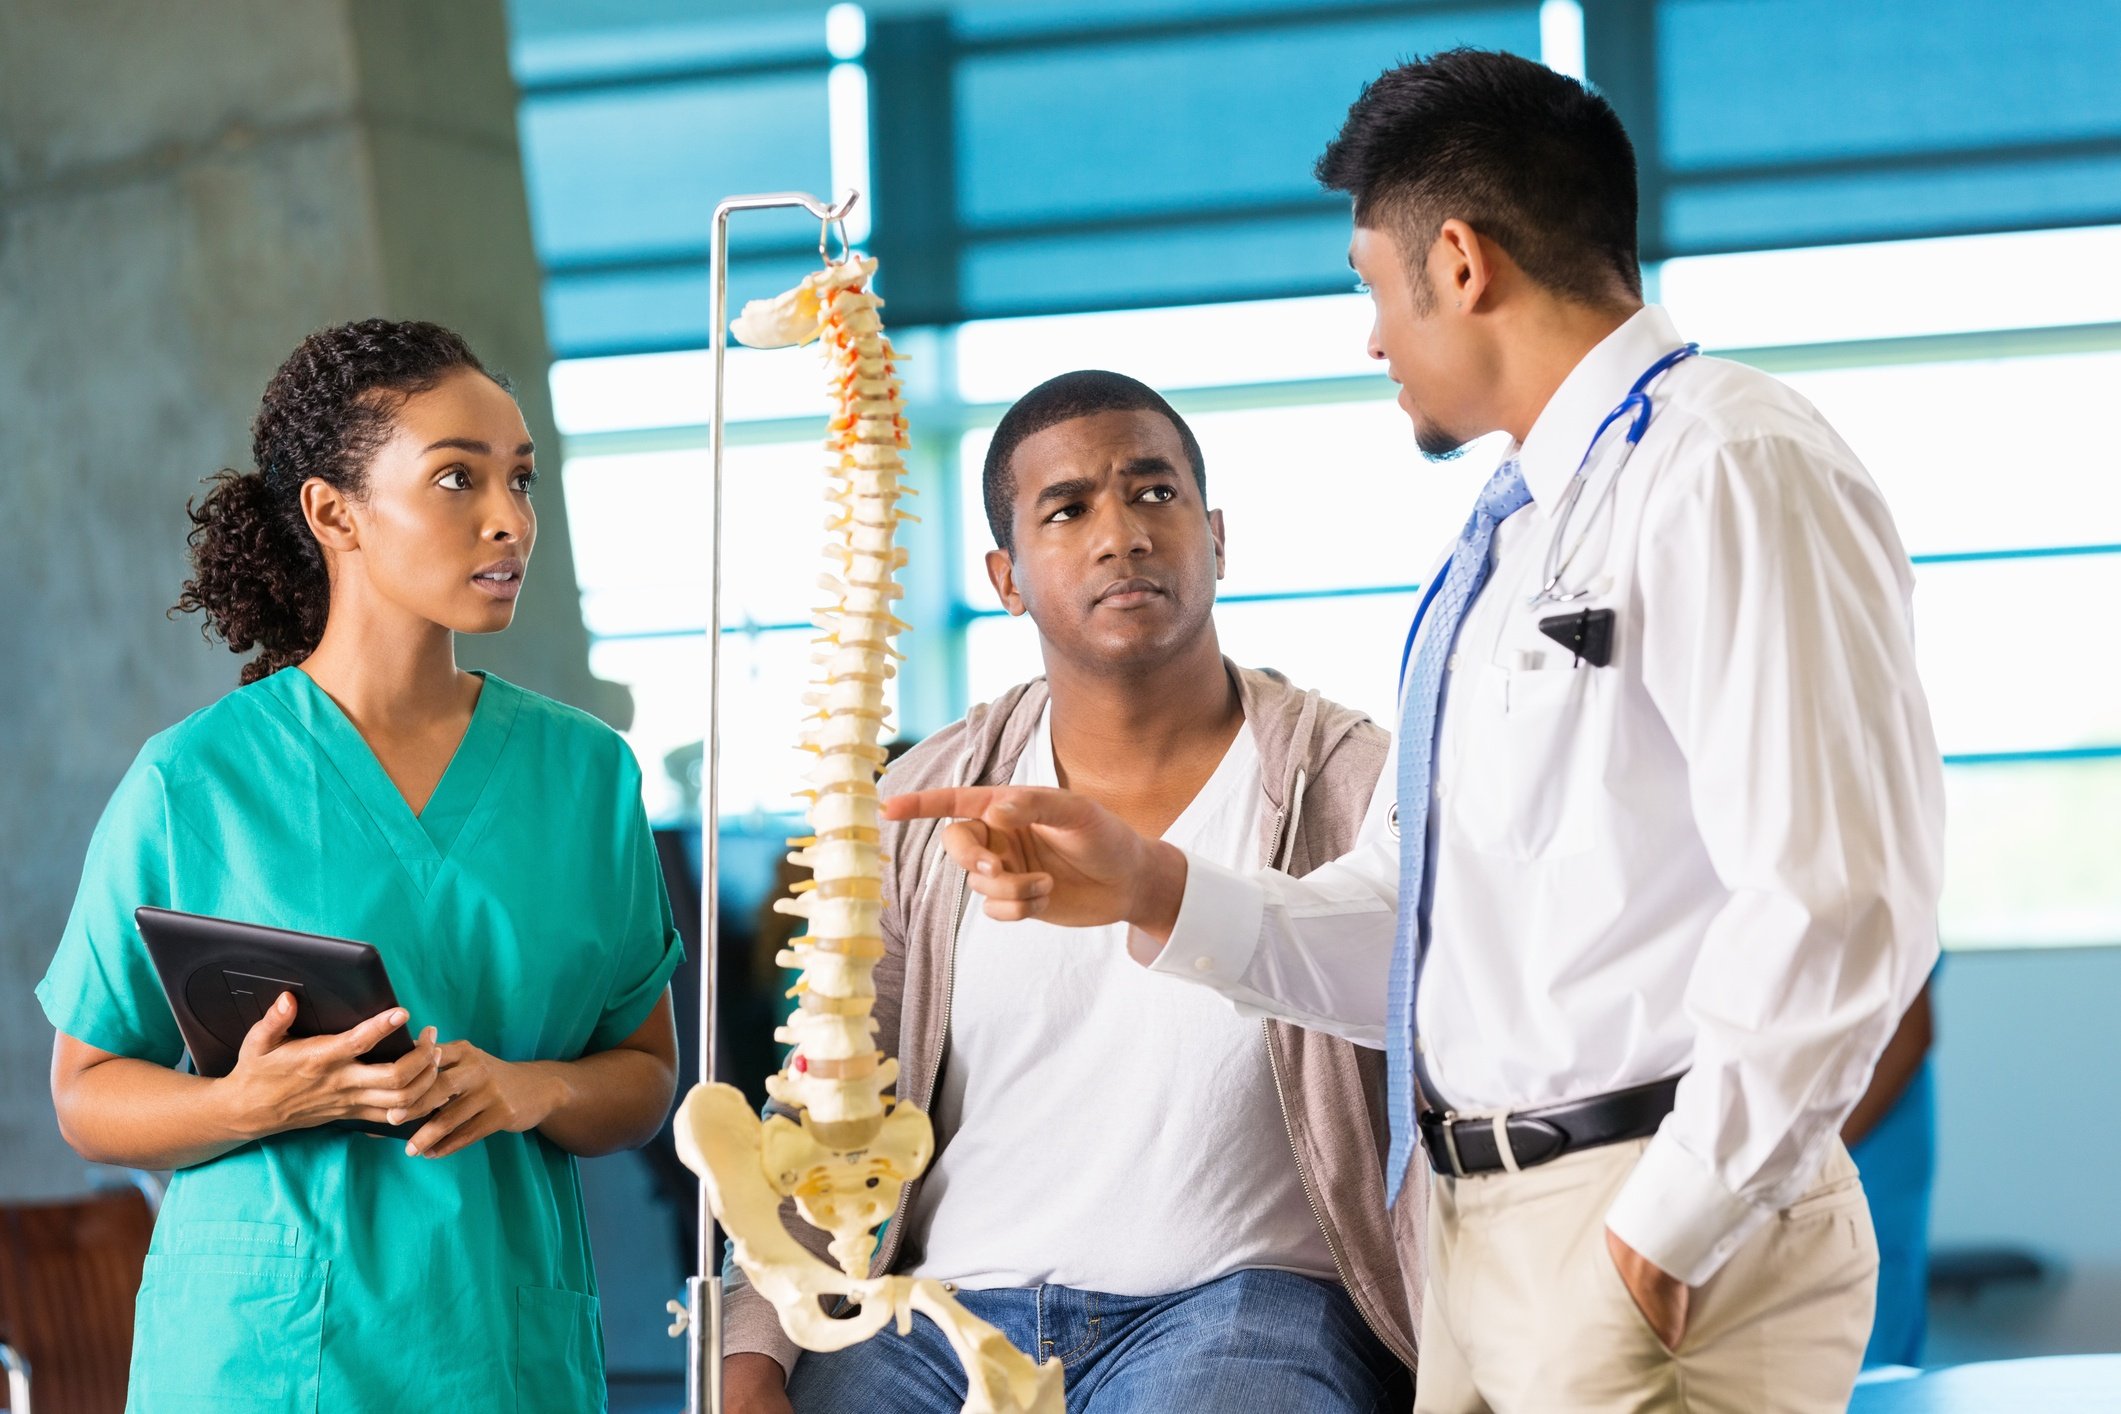 5 Questions to Ask Before Selecting a Doctor of Chiropractic Program